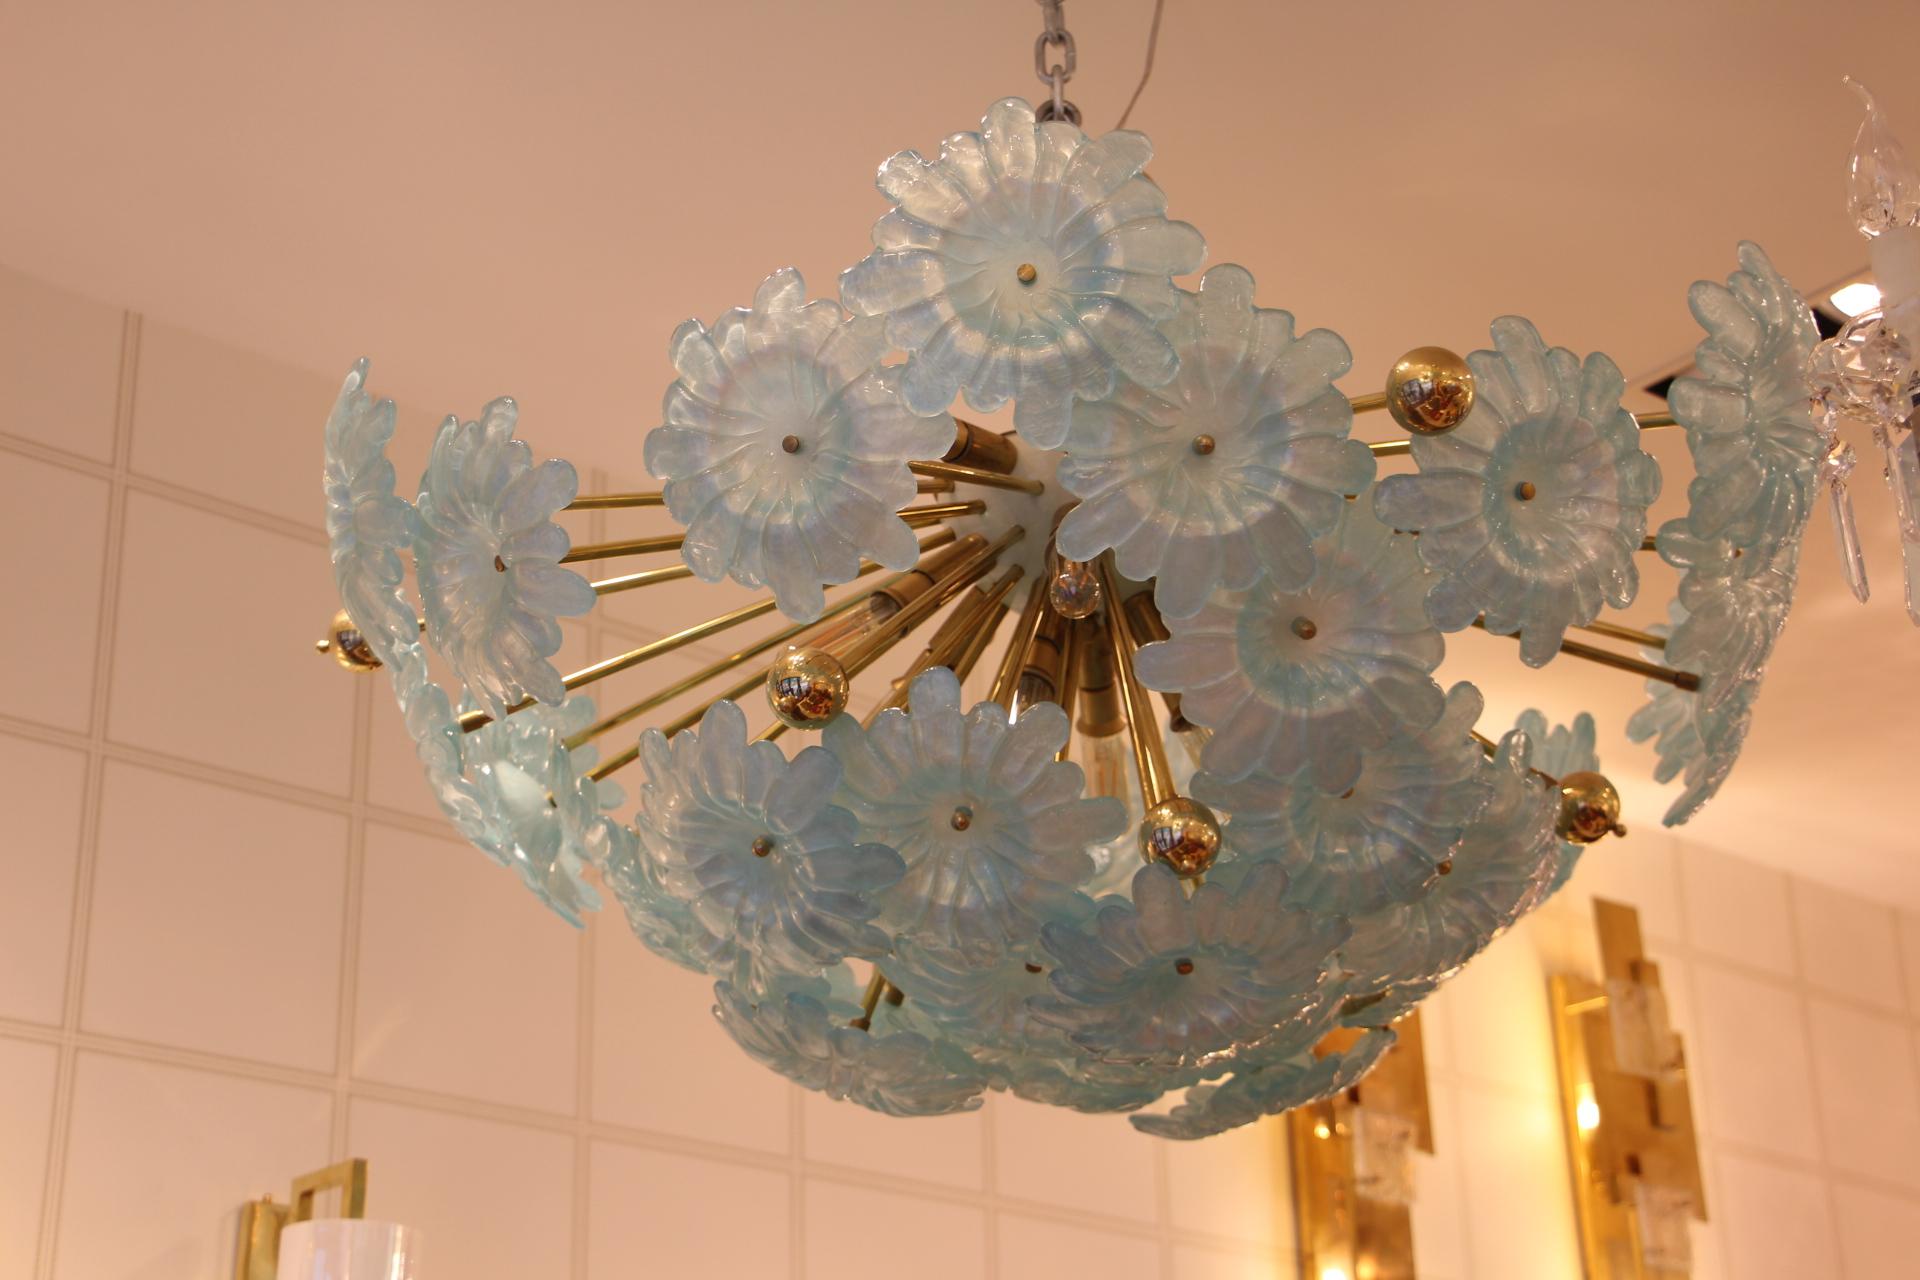 This very unusual half Sputnik chandelier features a multitude of brass rods, some ending with brass balls and others ending with large blue flowers in Murano glass.
All the rods have got different length so that flowers are on different levels and